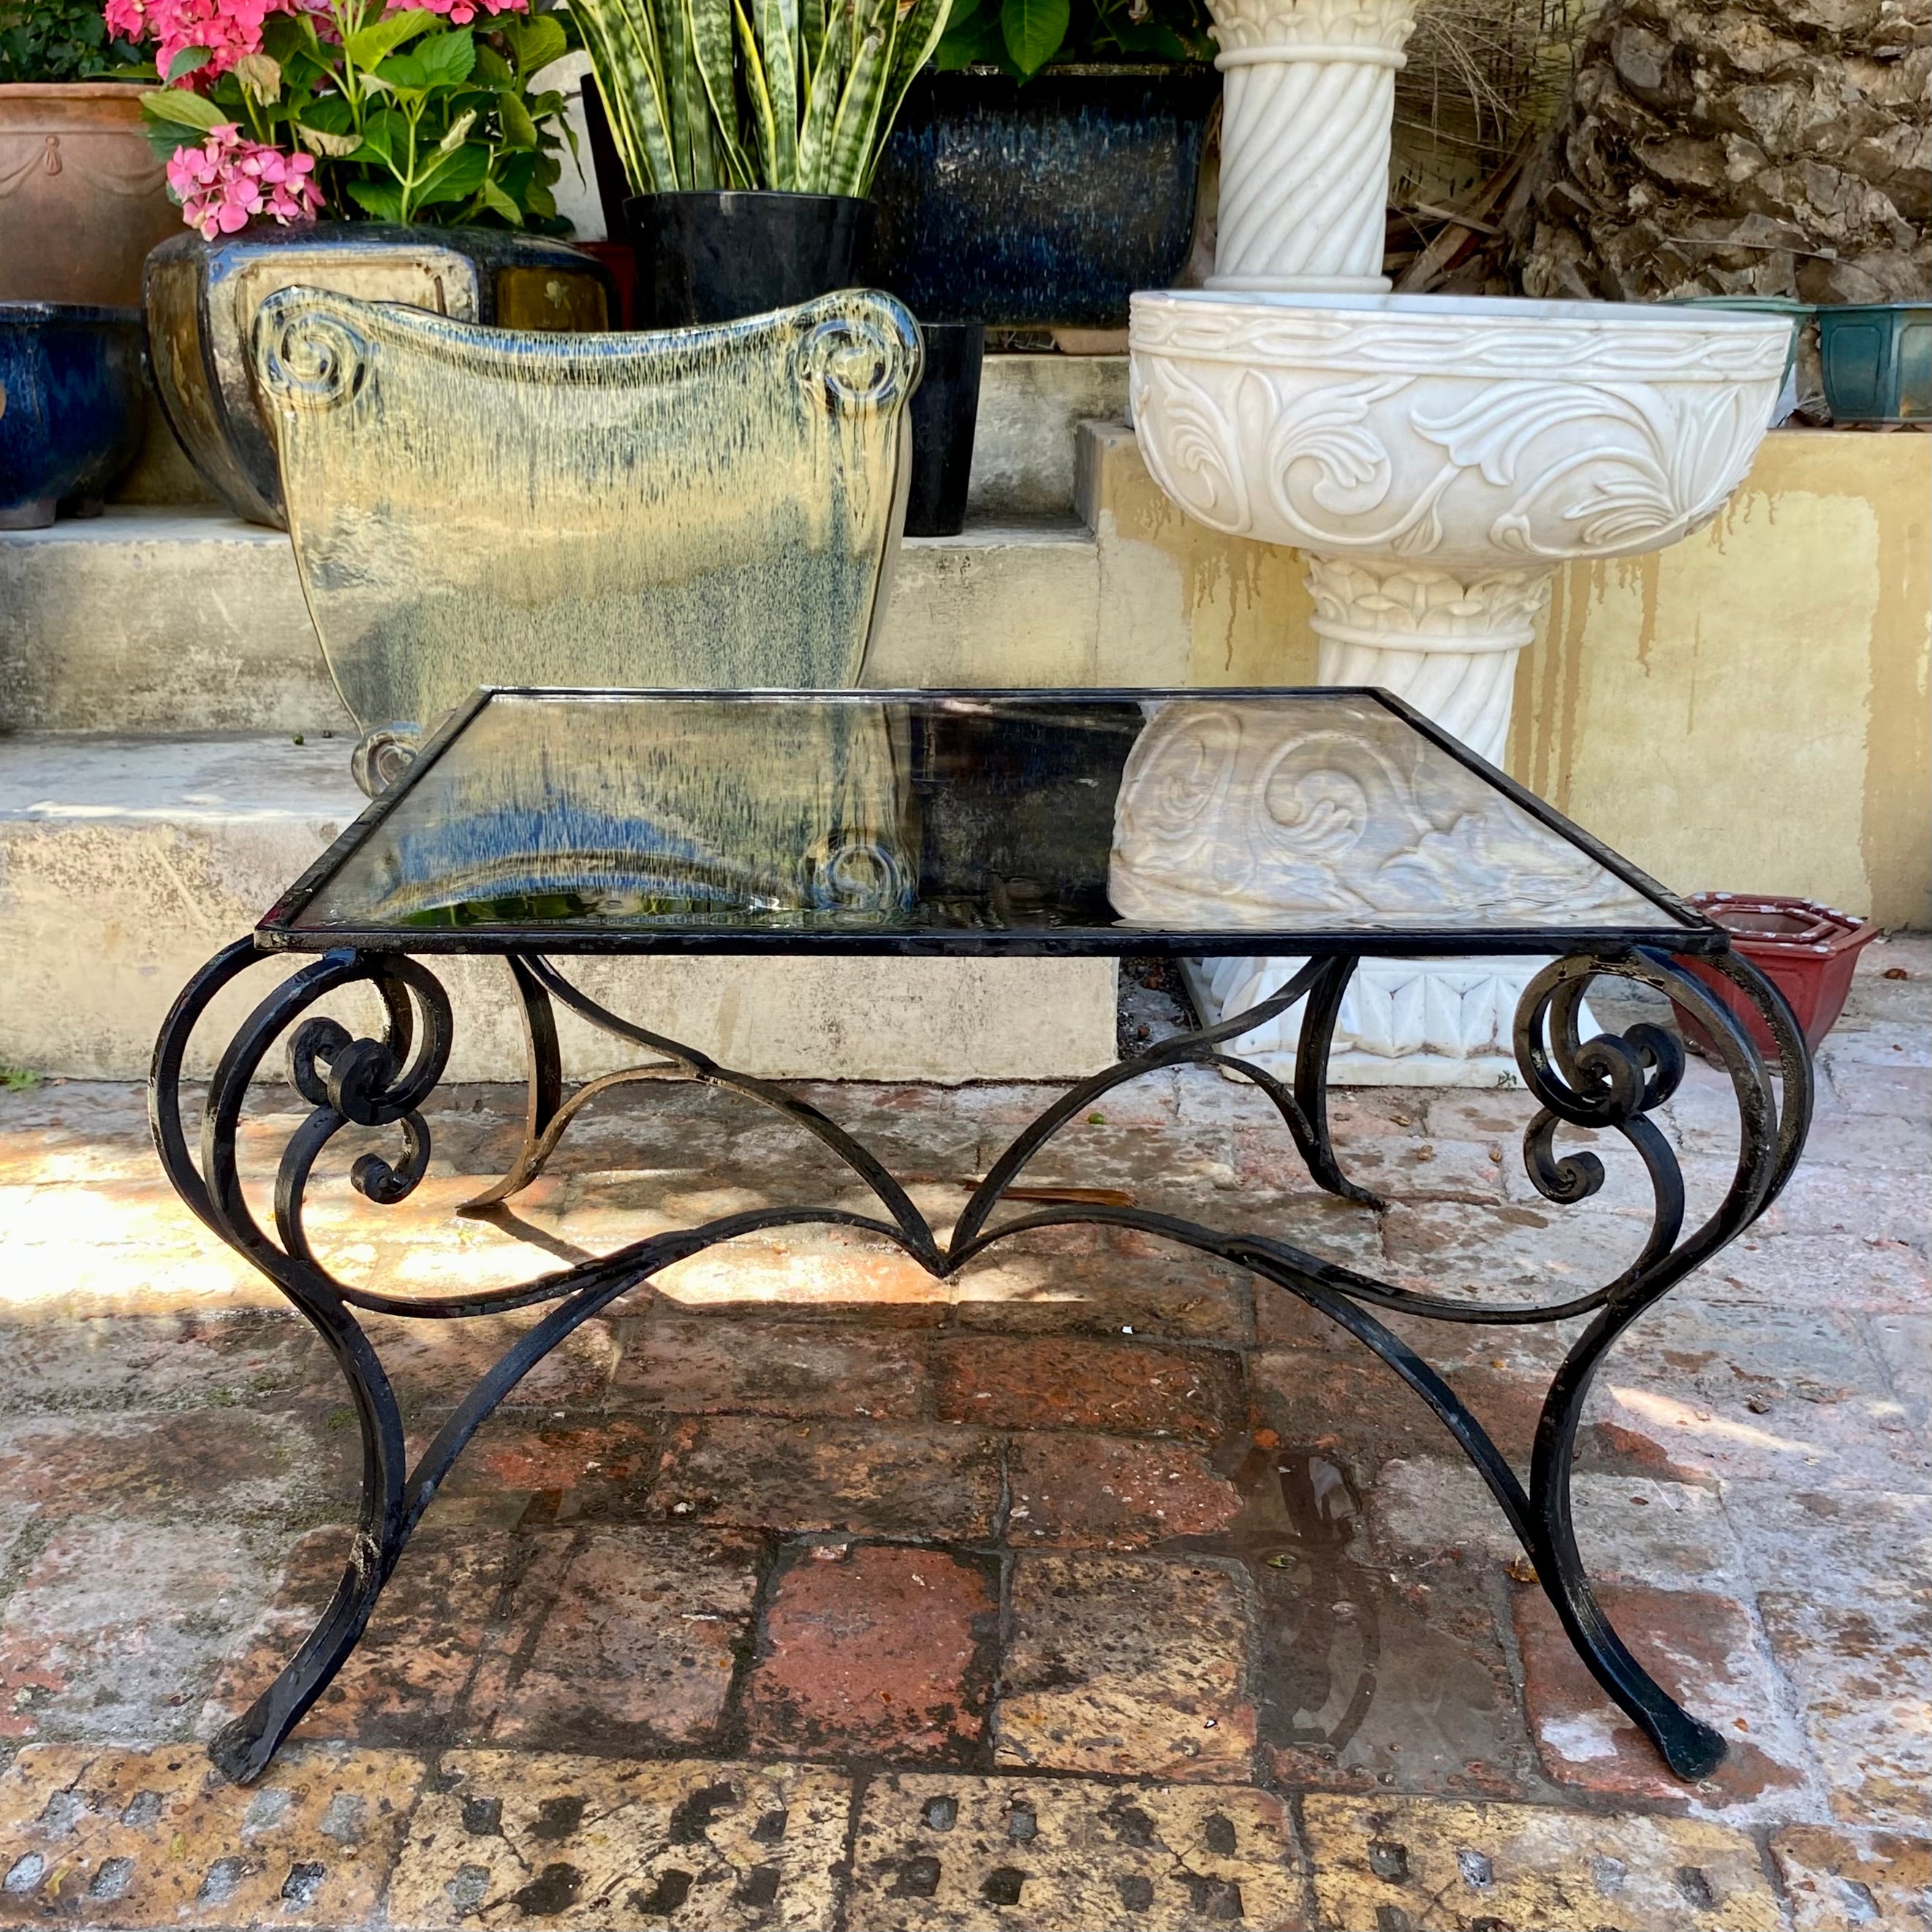 Wrought Iron and Glass Garden Coffee Table